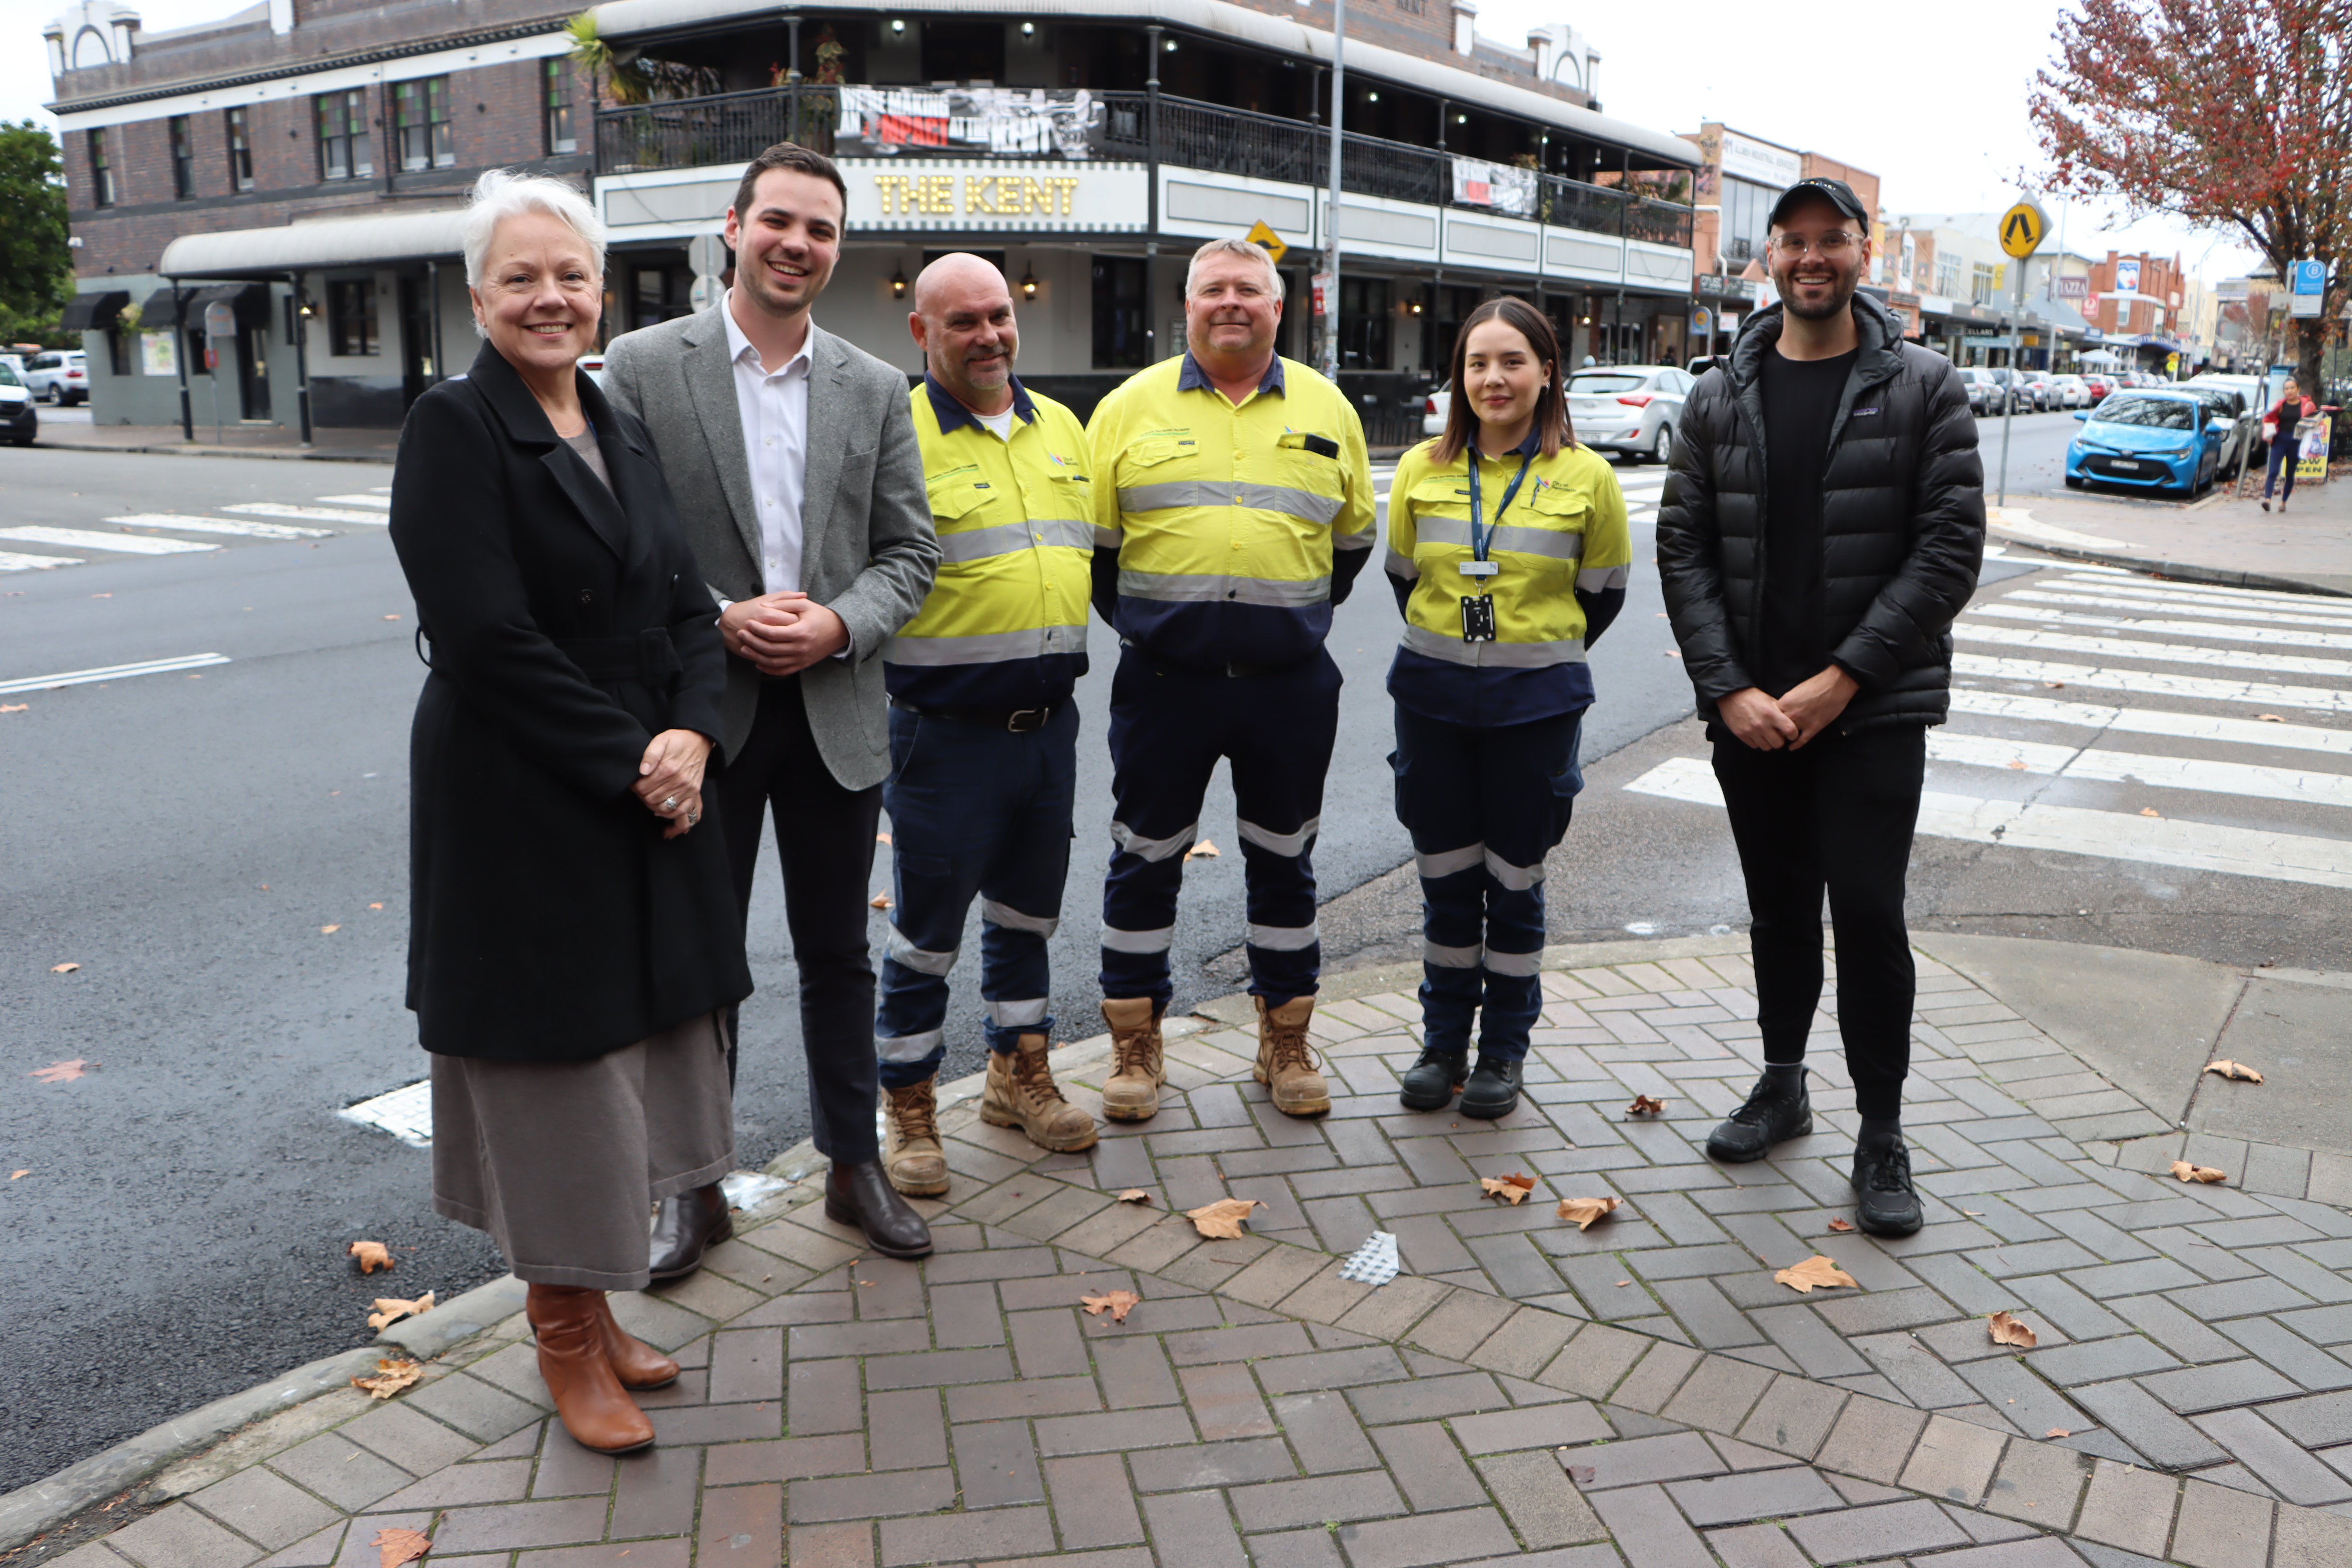 (L-R): Councillor Carol Duncan, Deputy Lord Mayor Declan Clausen, CN Civil Works Contracts Supervisor's Bruce Pemberton and Geoff Blomfield, CN Operations Manager Bianca Field-Vo and Hamilton BIA chair Reece Hignall.